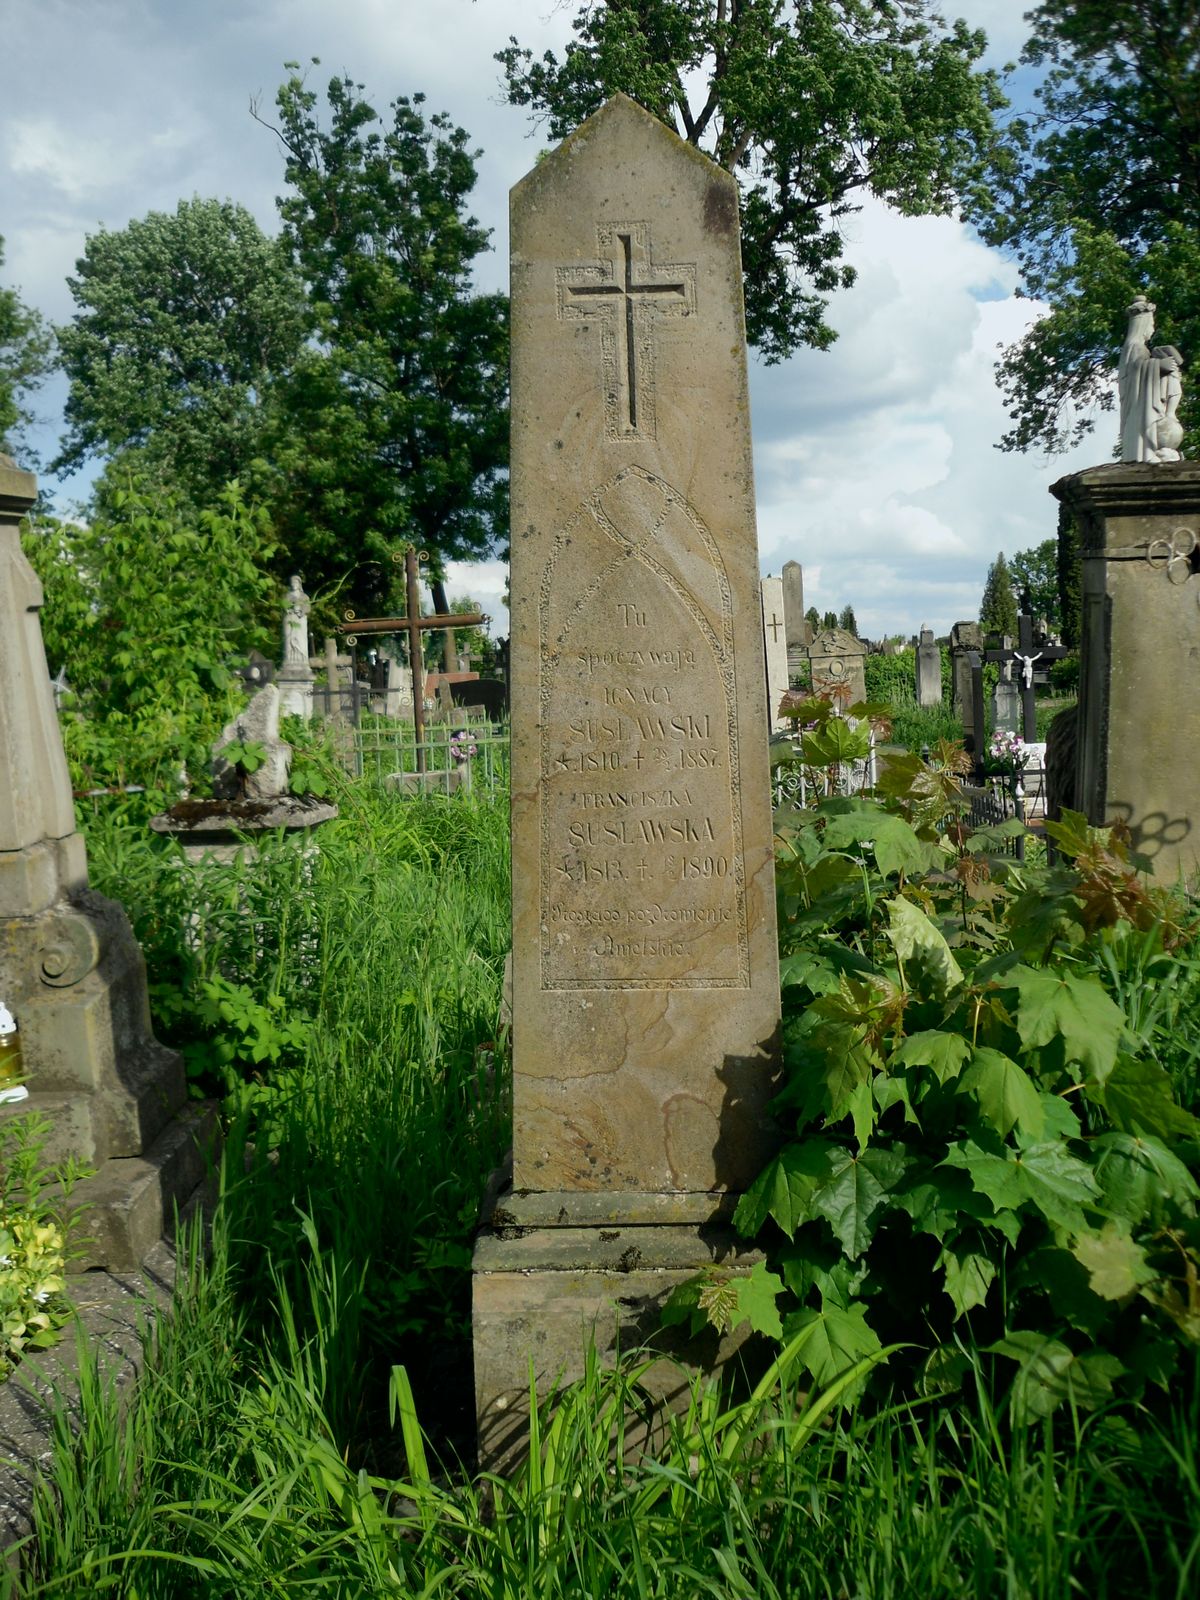 Tombstone of Franciszka and Ignacy Suslawski from the cemeteries of the former Ternopil district, as of 2016.